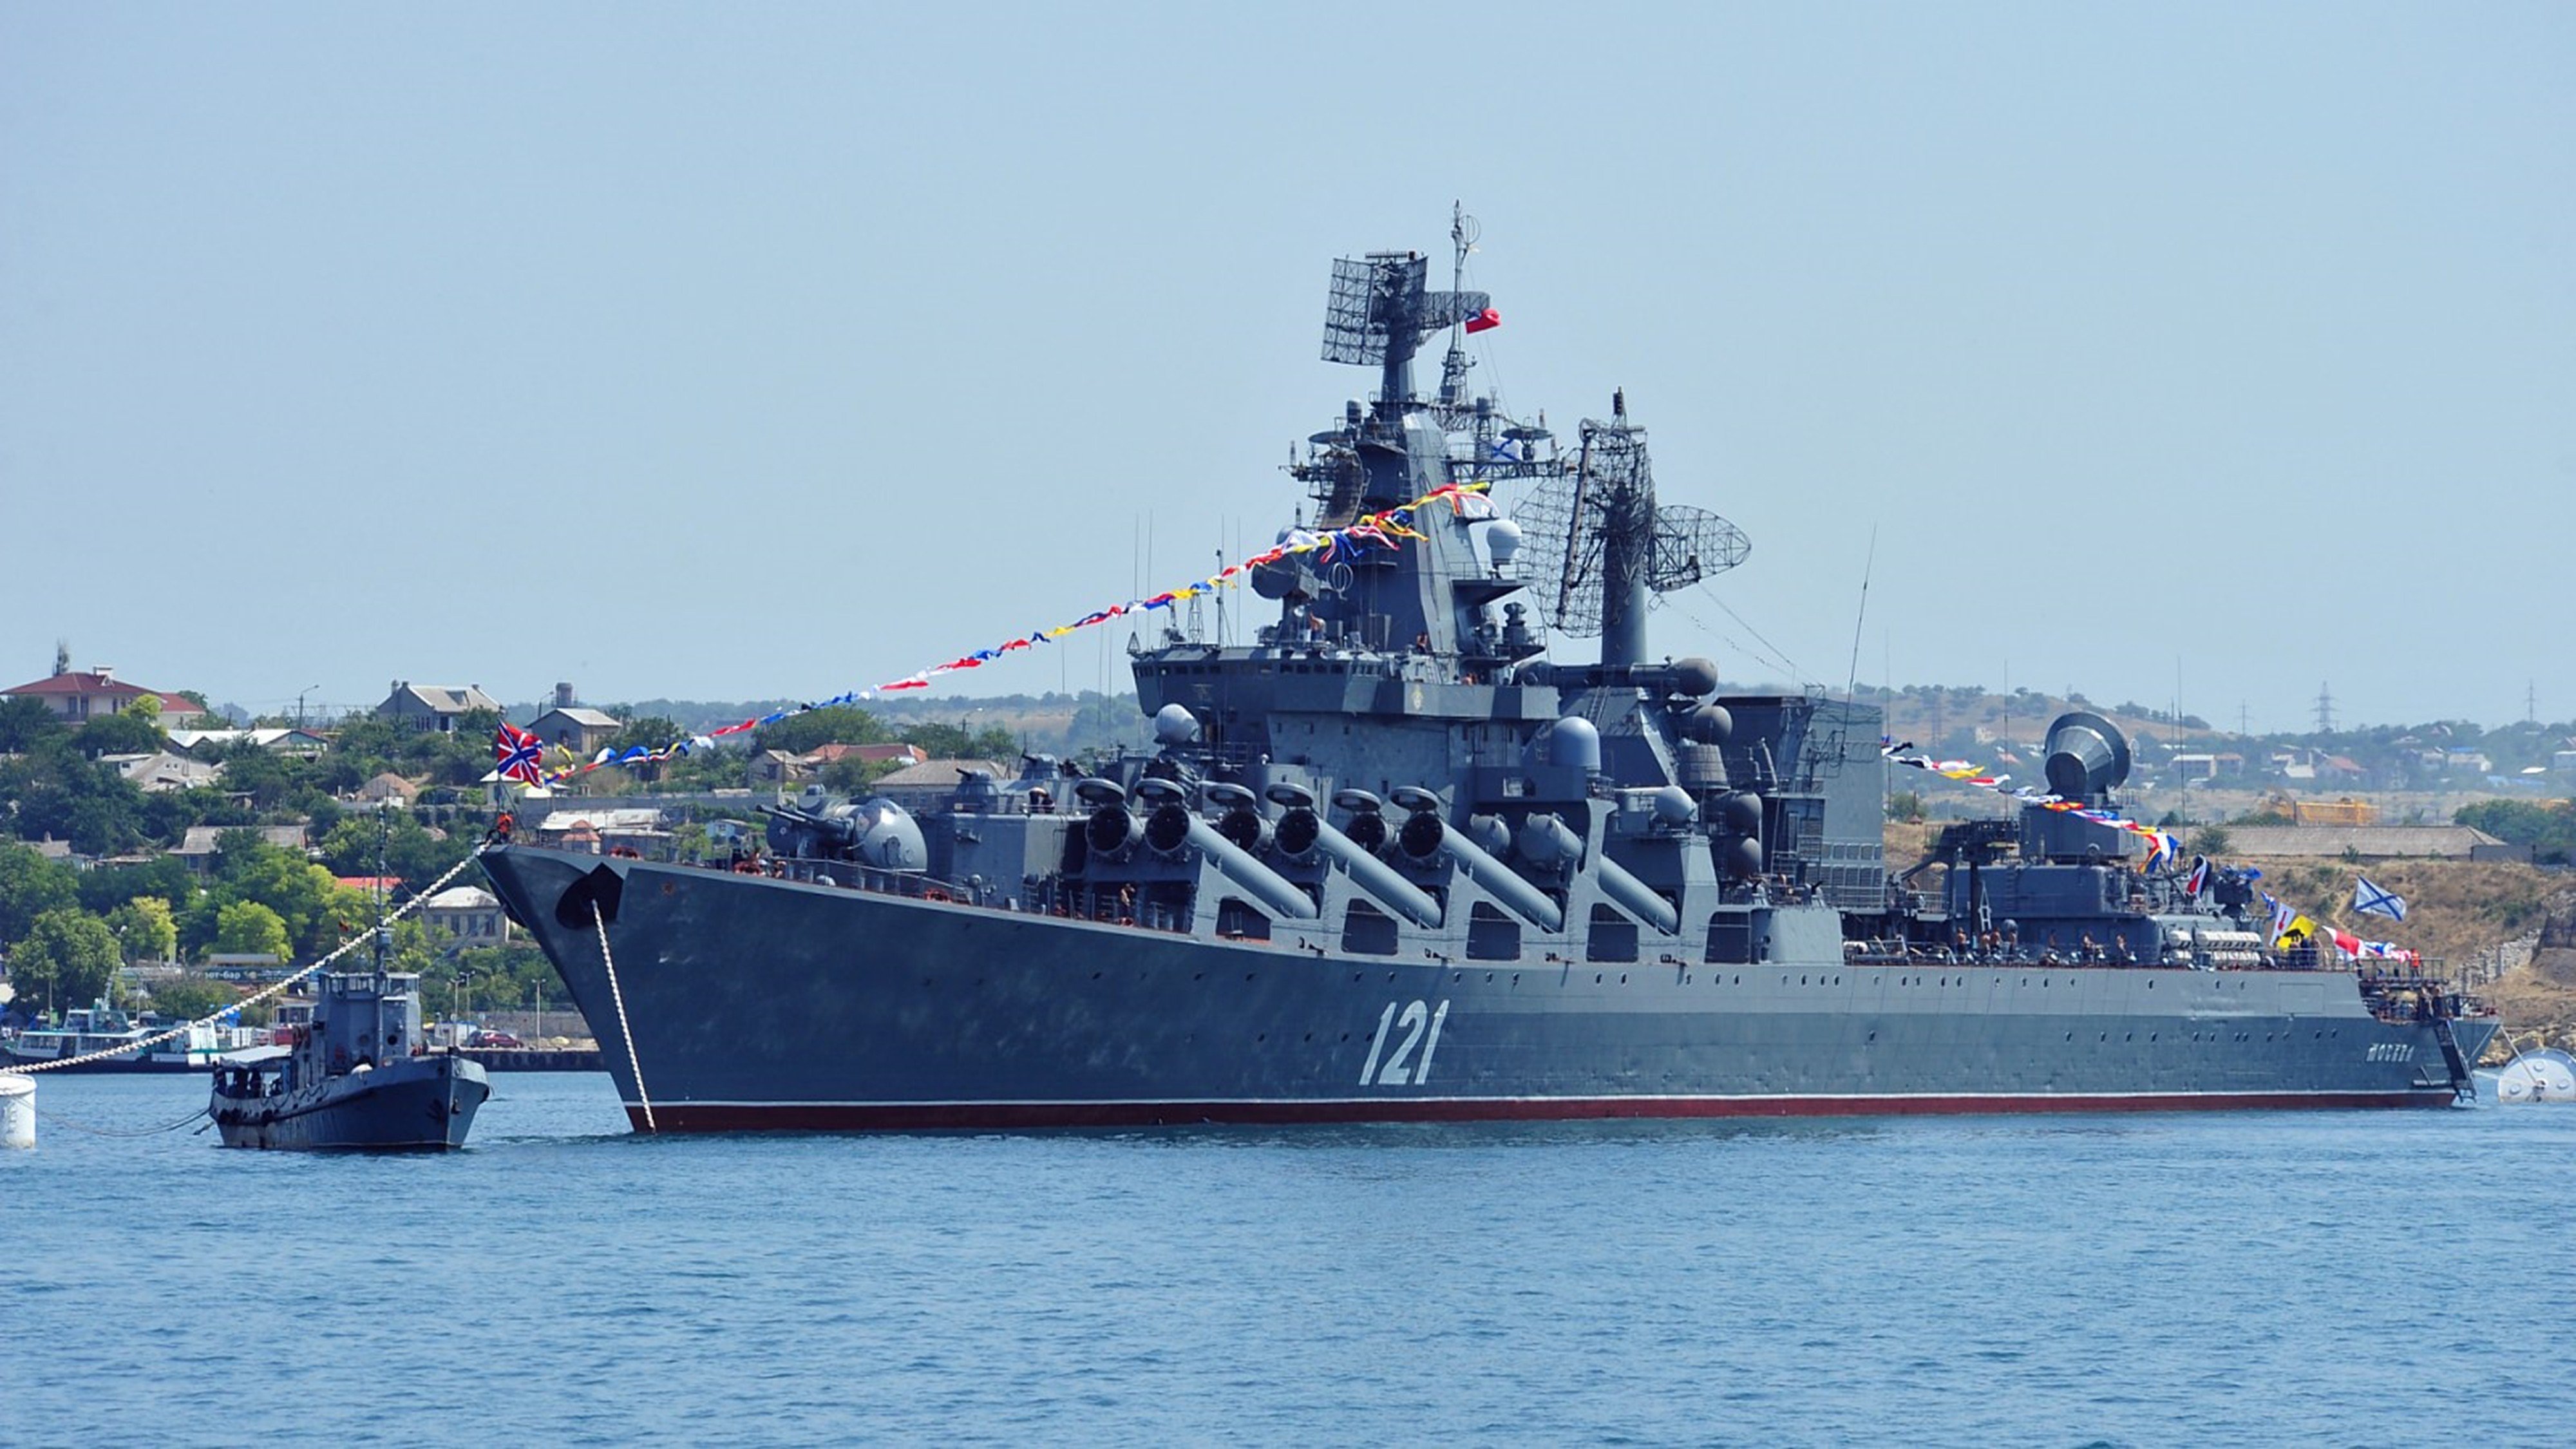 Amazing Russian Navy Pictures & Backgrounds